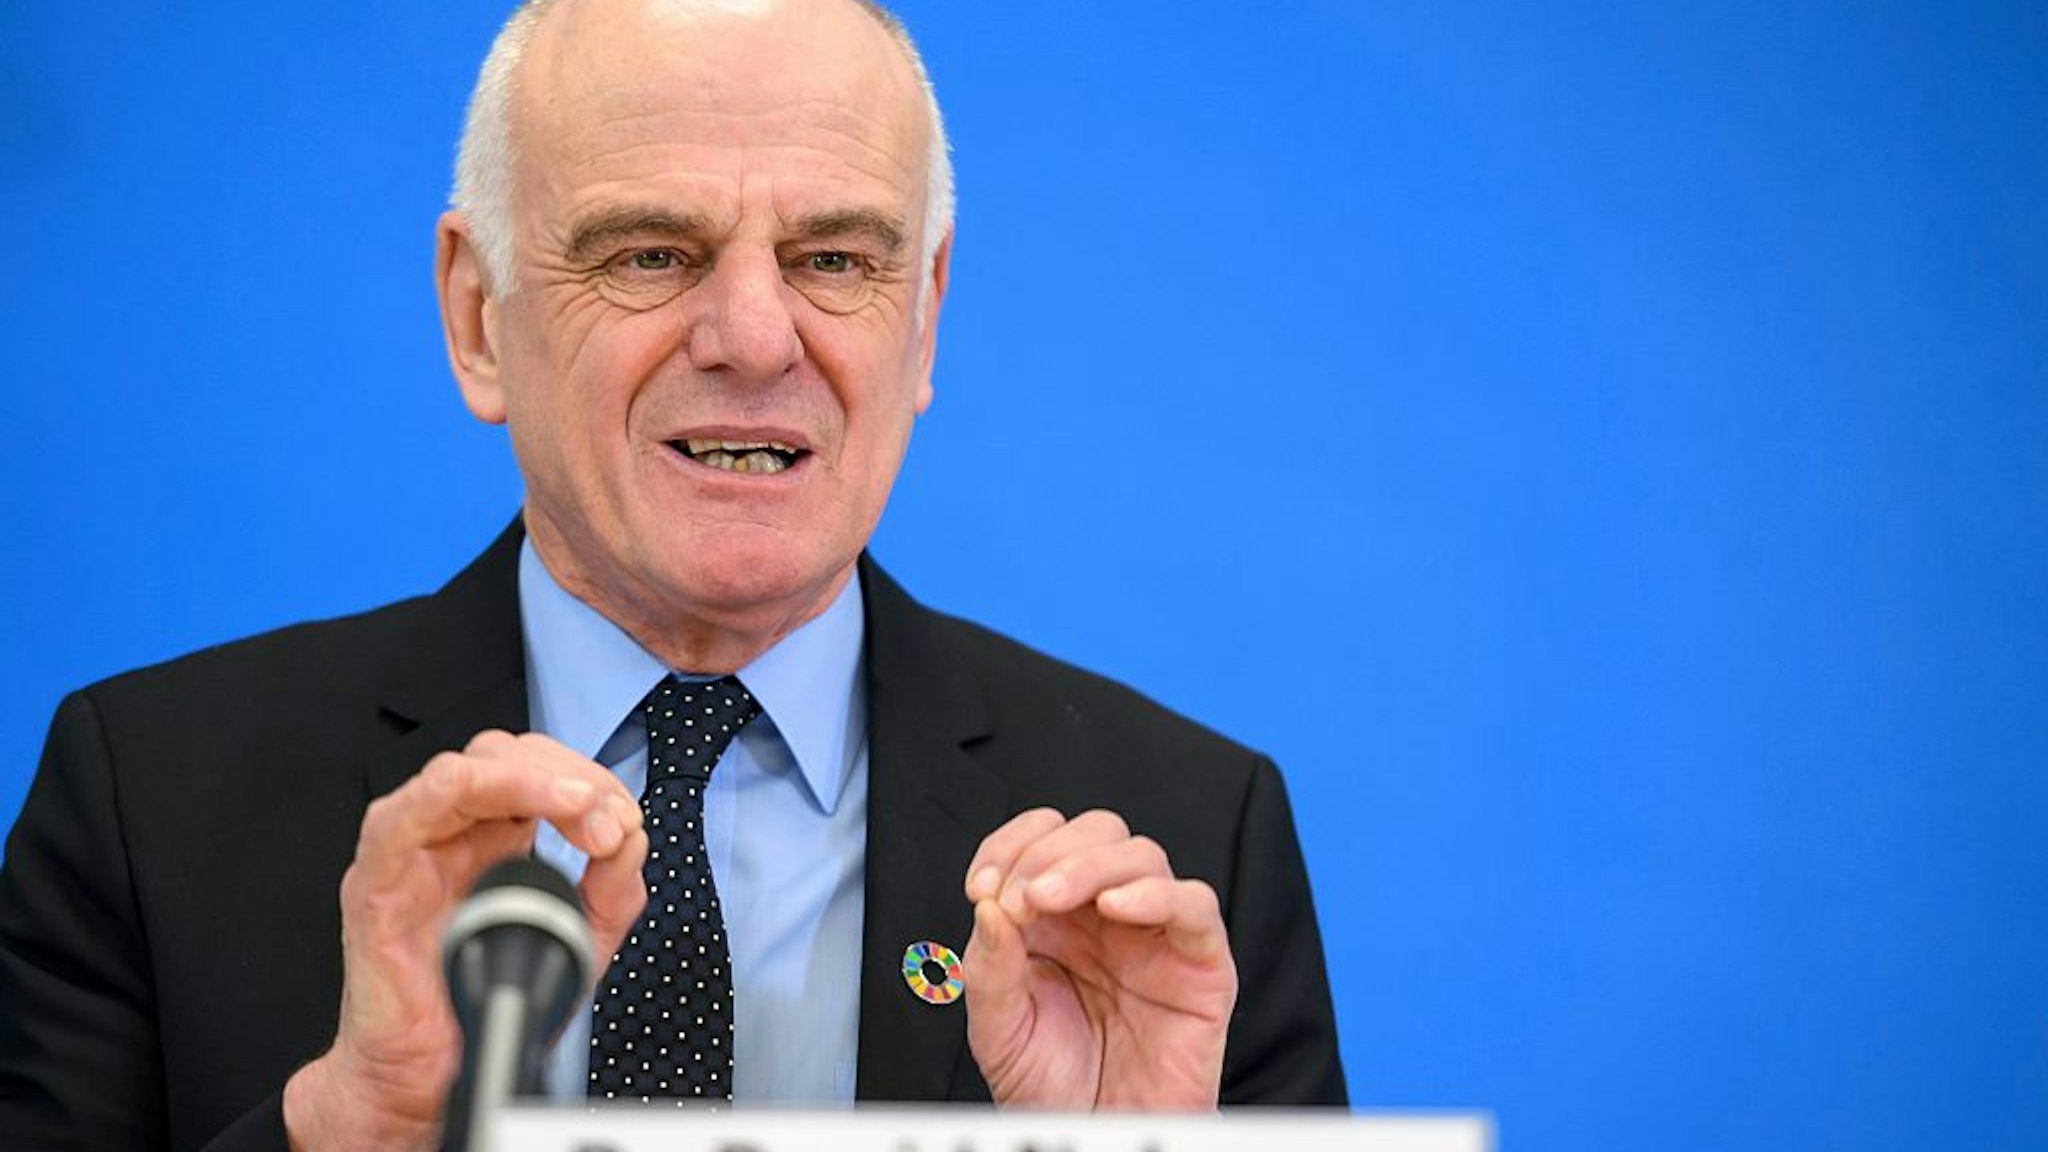 Candidate to the post of Director-General of the World Health Organization (WHO) David Nabarro gestures during a press conference on January 26, 2017 in Geneva.